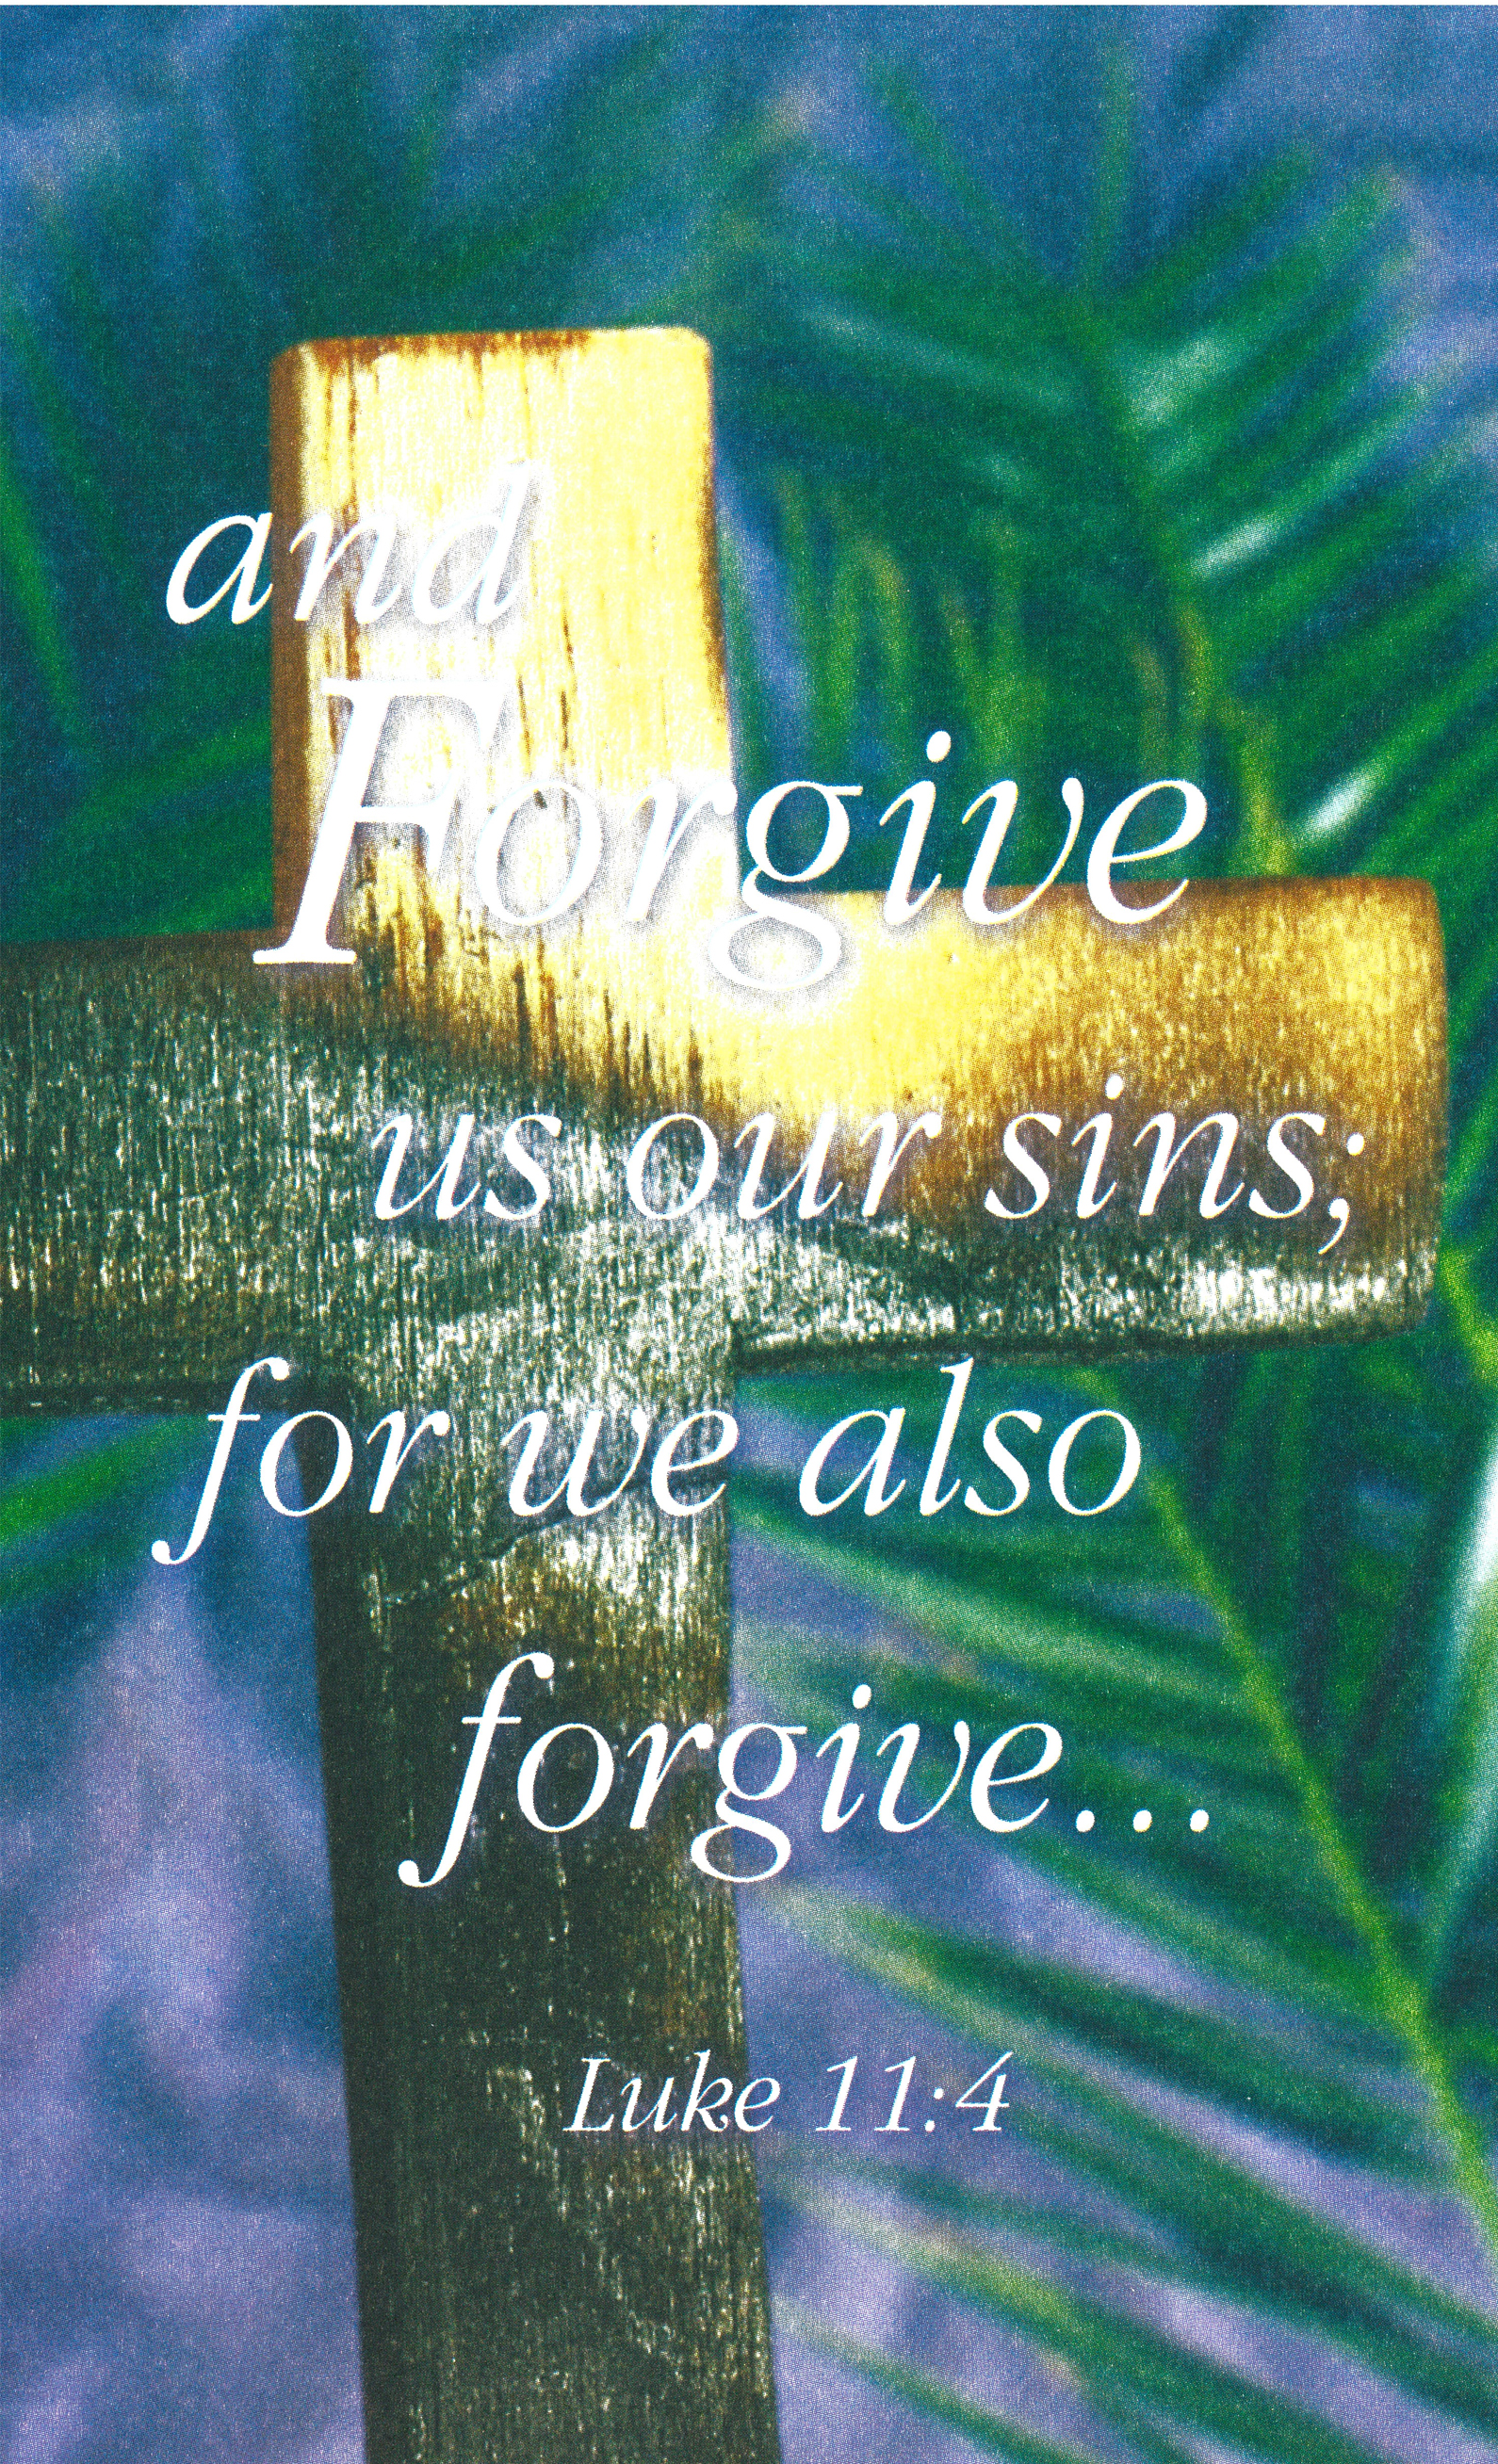 Bulletin Covers Reconciliation Forgive Our Sins-9892